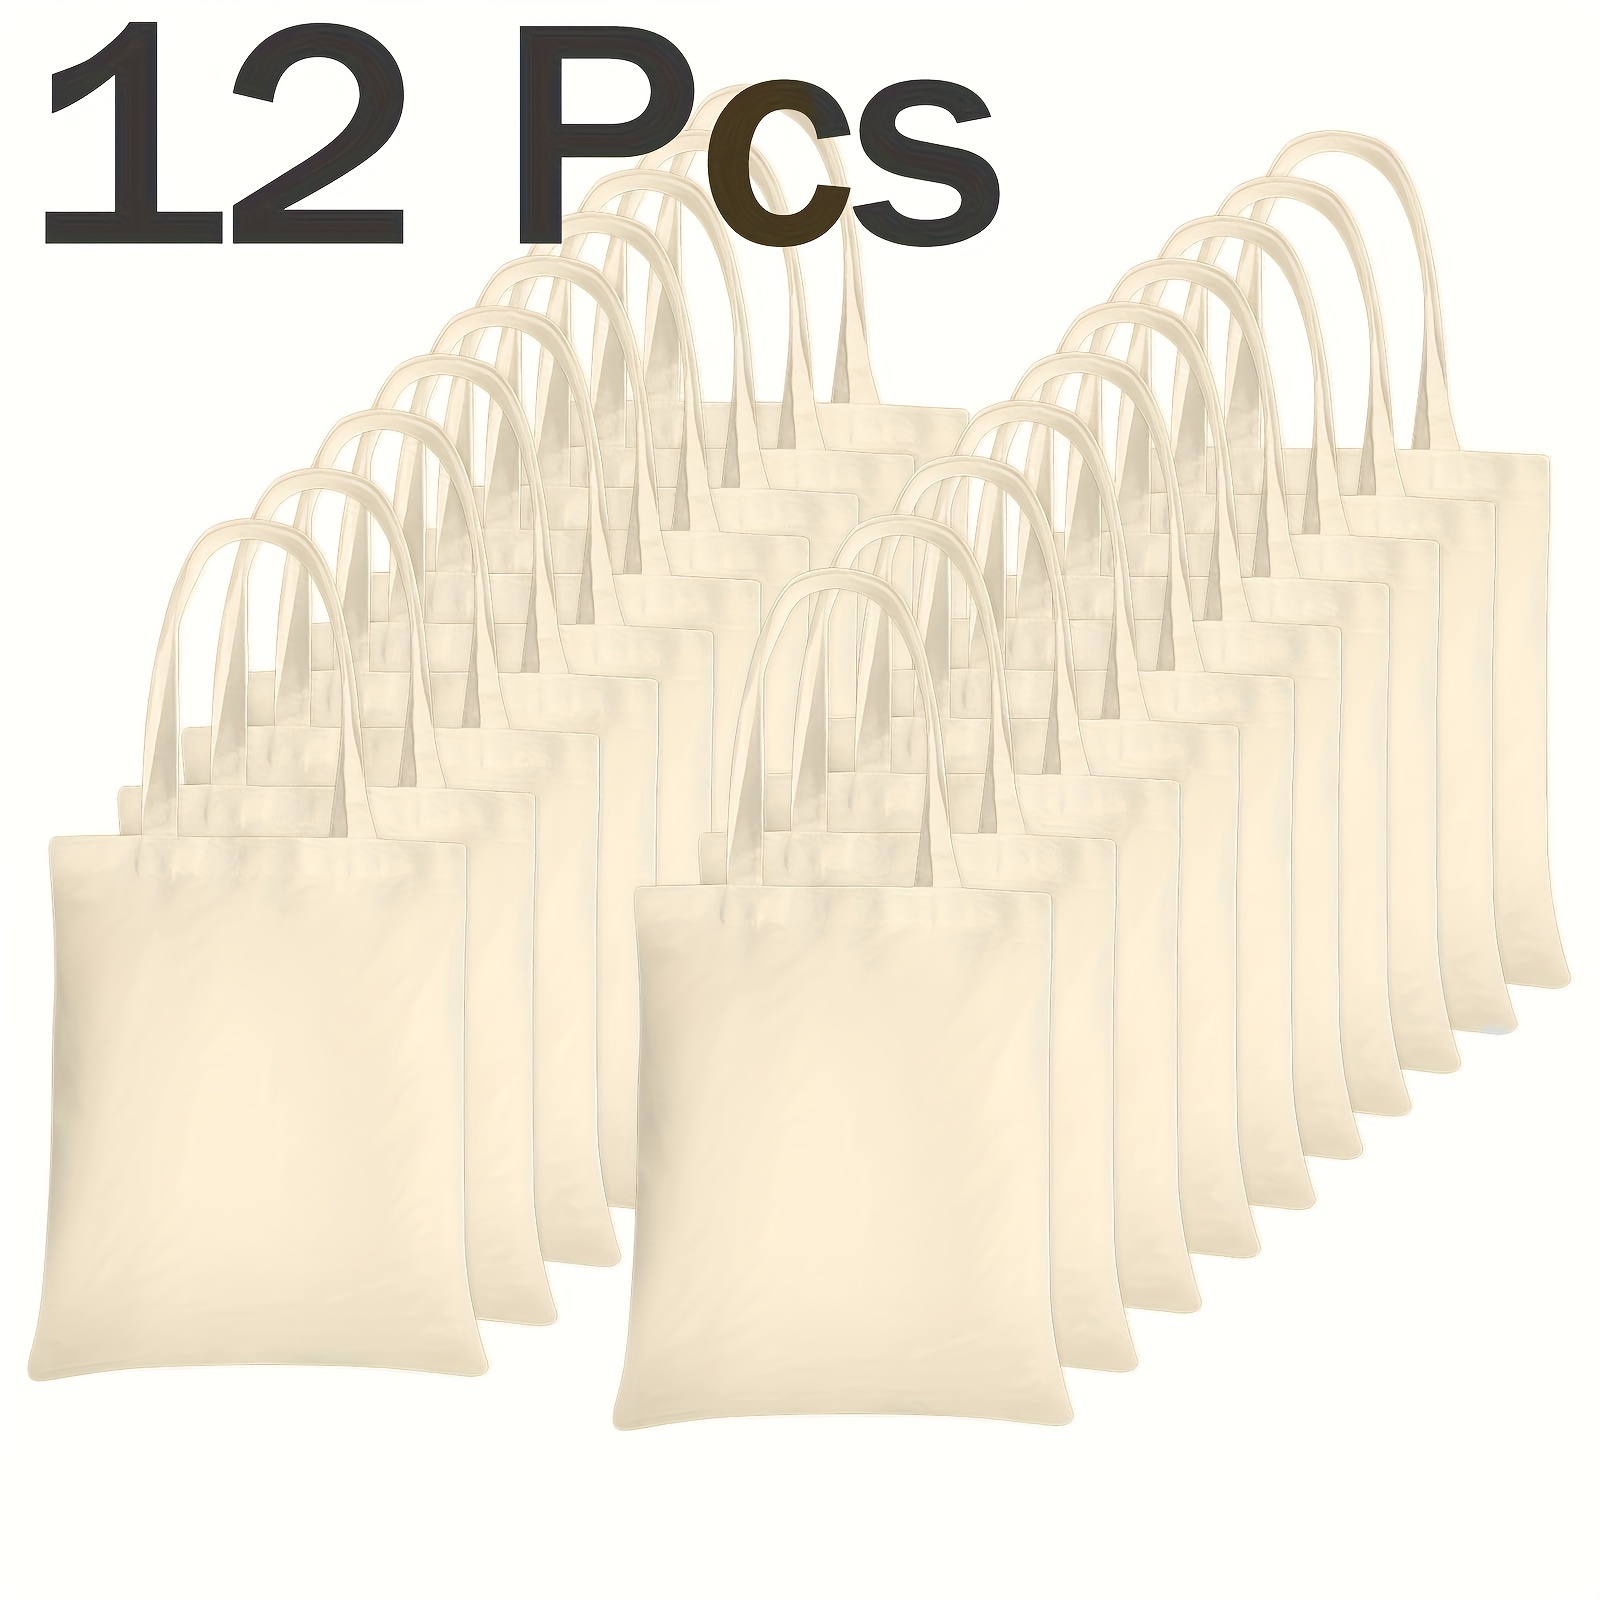 20 Pieces Canvas Tote Bags Bulk, Blank Plain Canvas Bag, Reusable Grocery  Shopping Cloth Bags with Handles